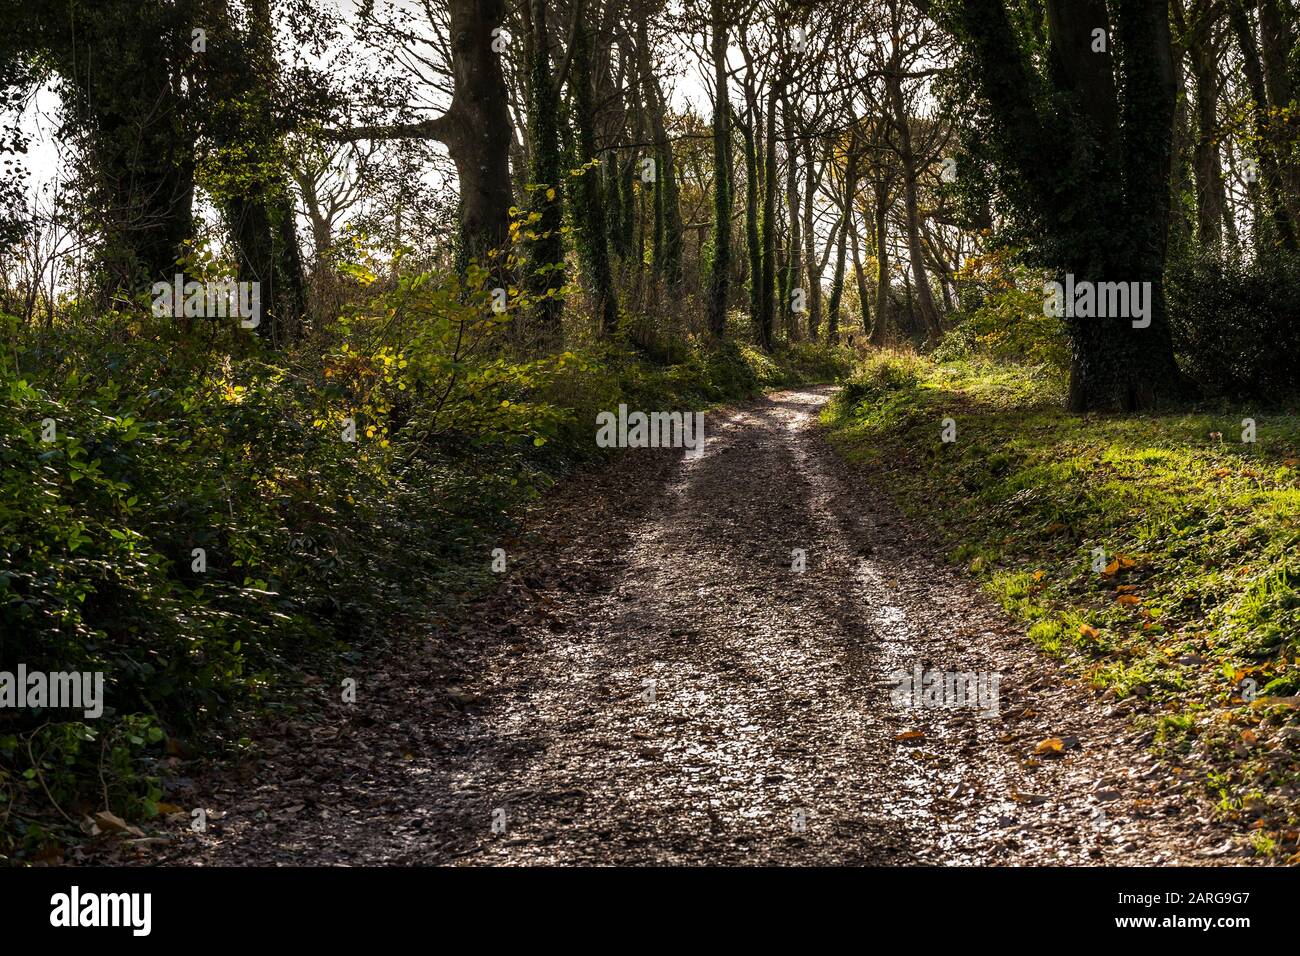 A muddy path in Colan Woods, the overgrown grounds of the historic Fir Hill Manor in Colan Parish in Newquay in Cornwall. Stock Photo